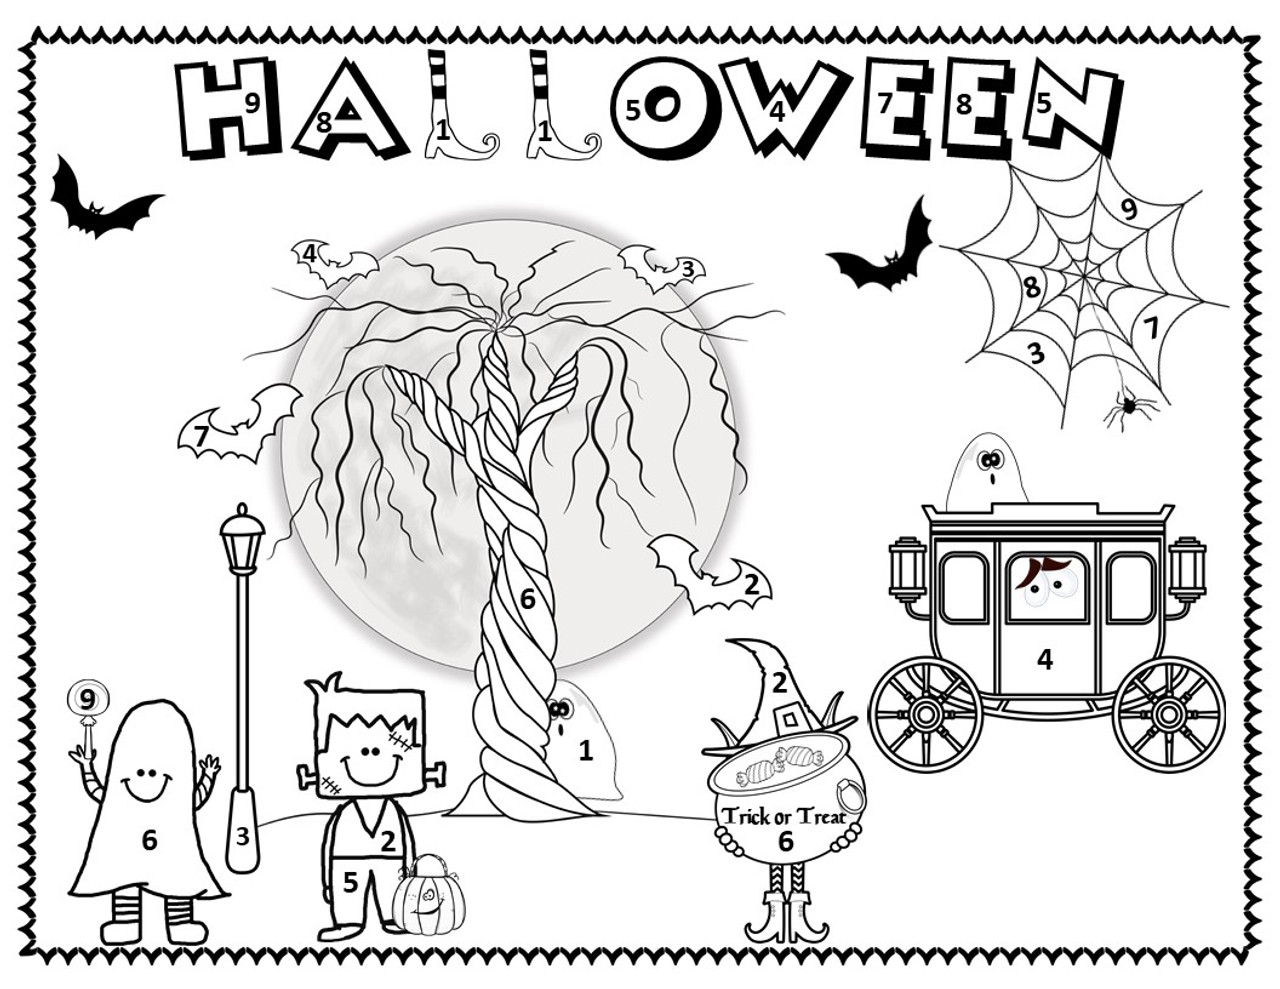  Sums of 10 - Halloween Addition Math Game and Activity - 1st and 2nd Grade 